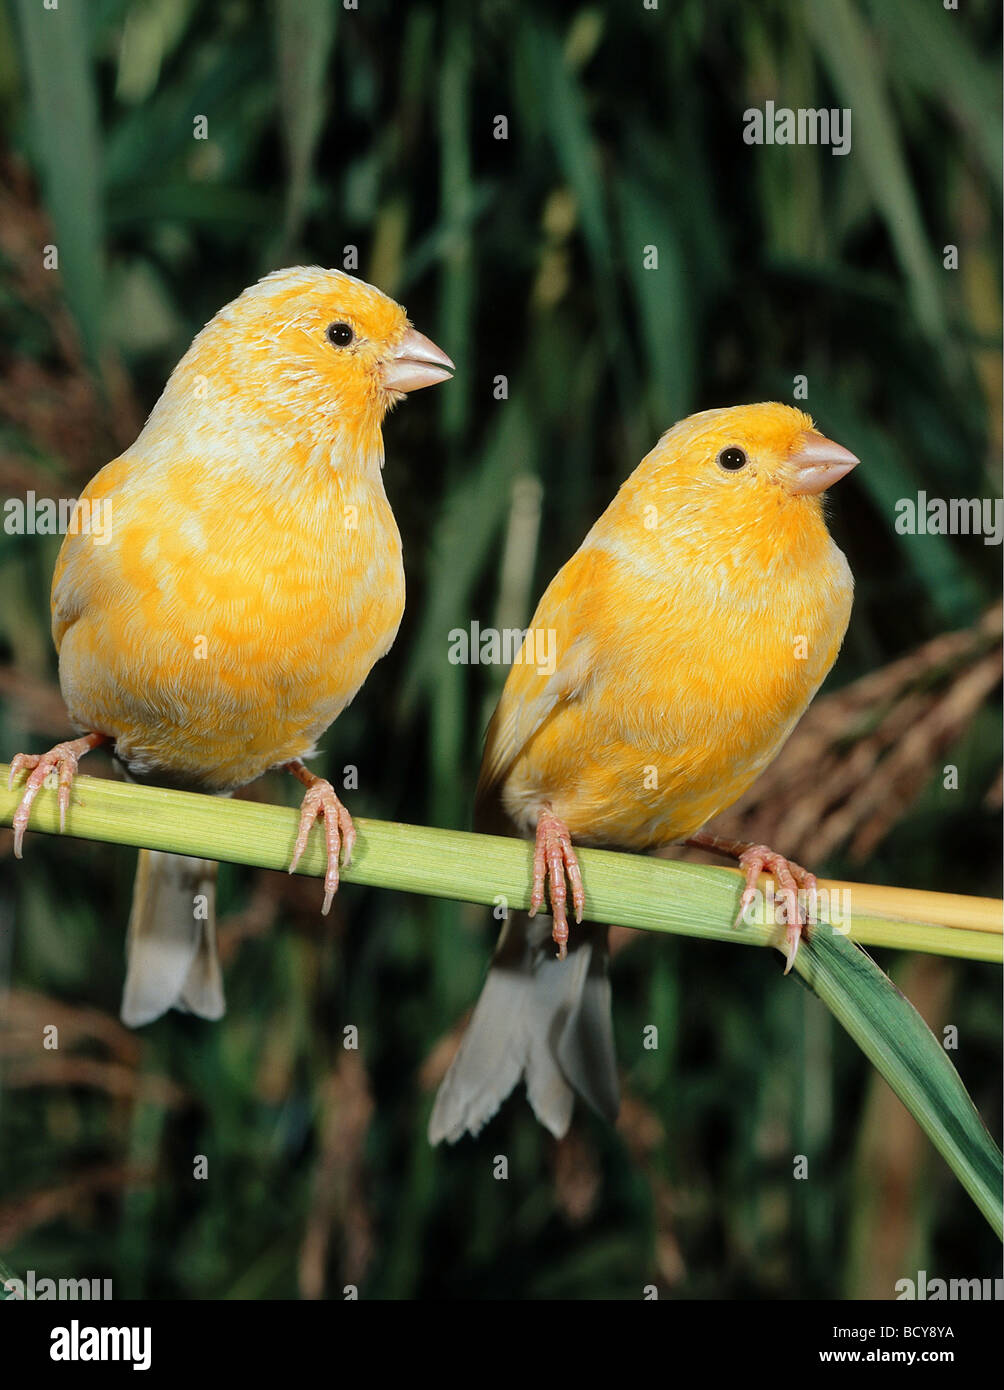 Canary (Serinus canaria), two birds perched Stock Photo